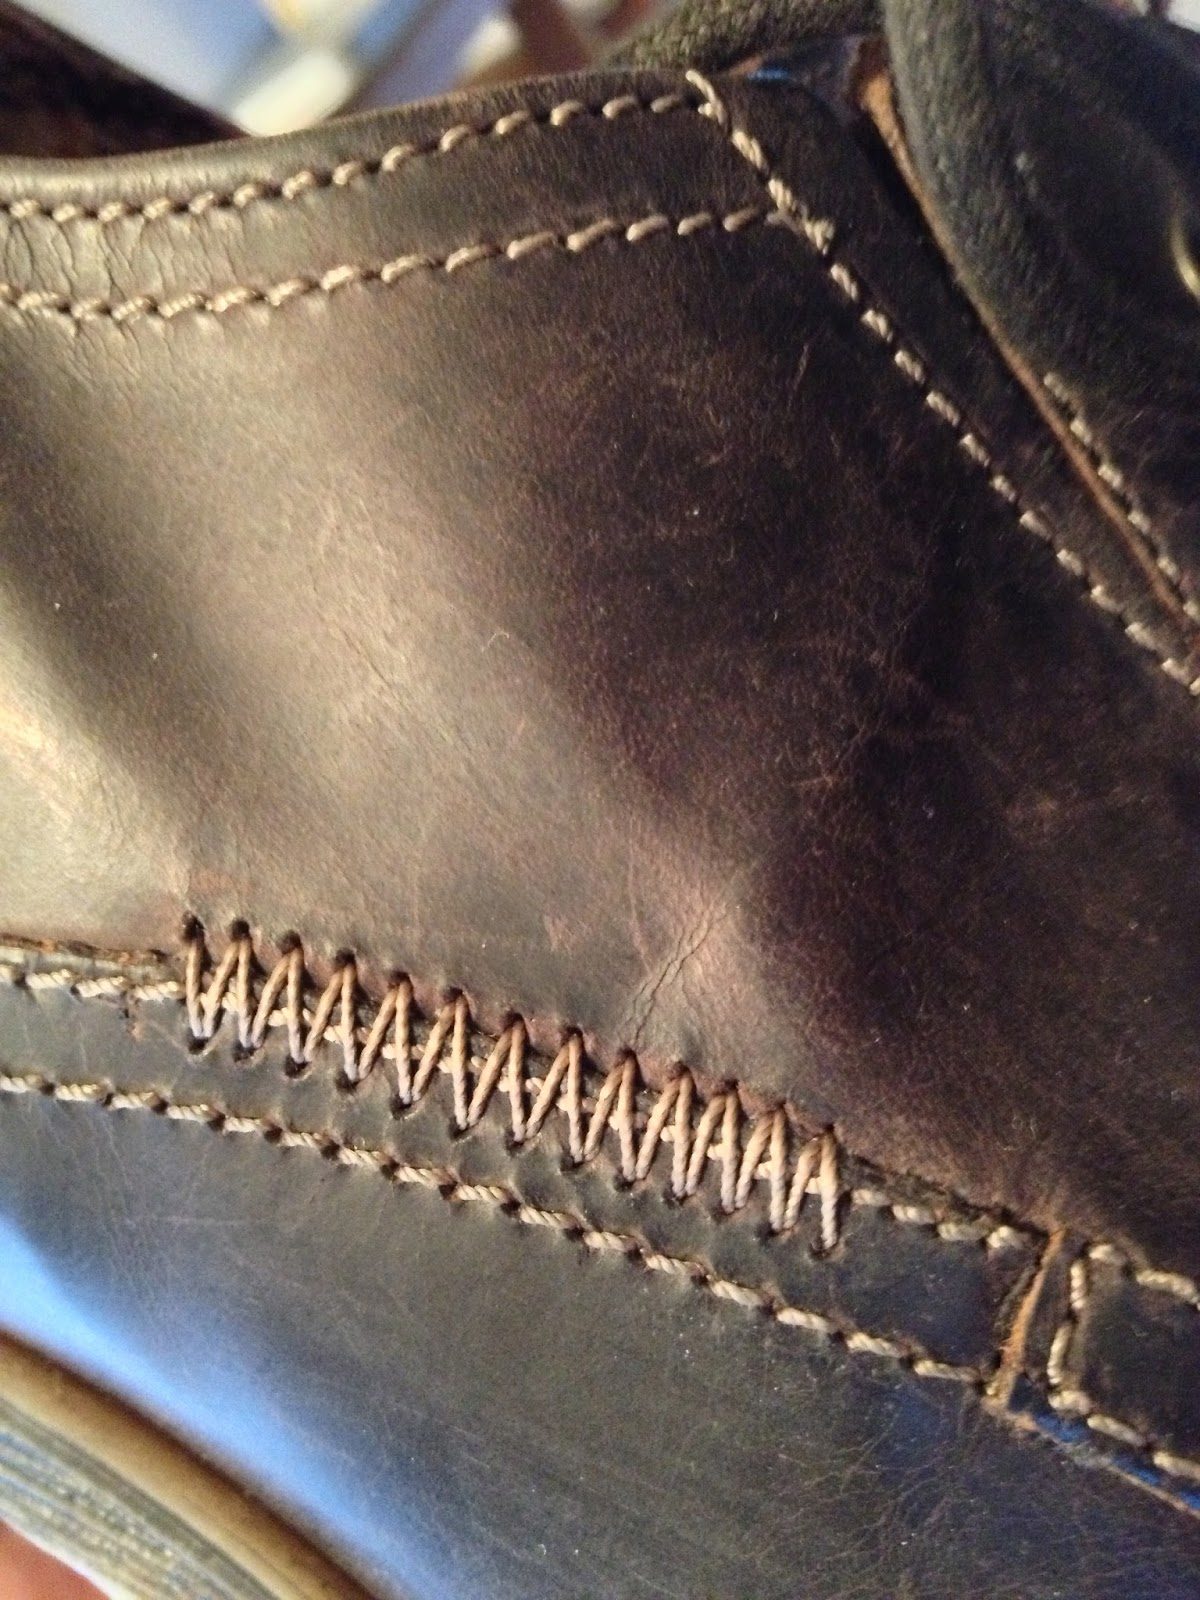 A zigzag stitching pattern on the side of a leather boot